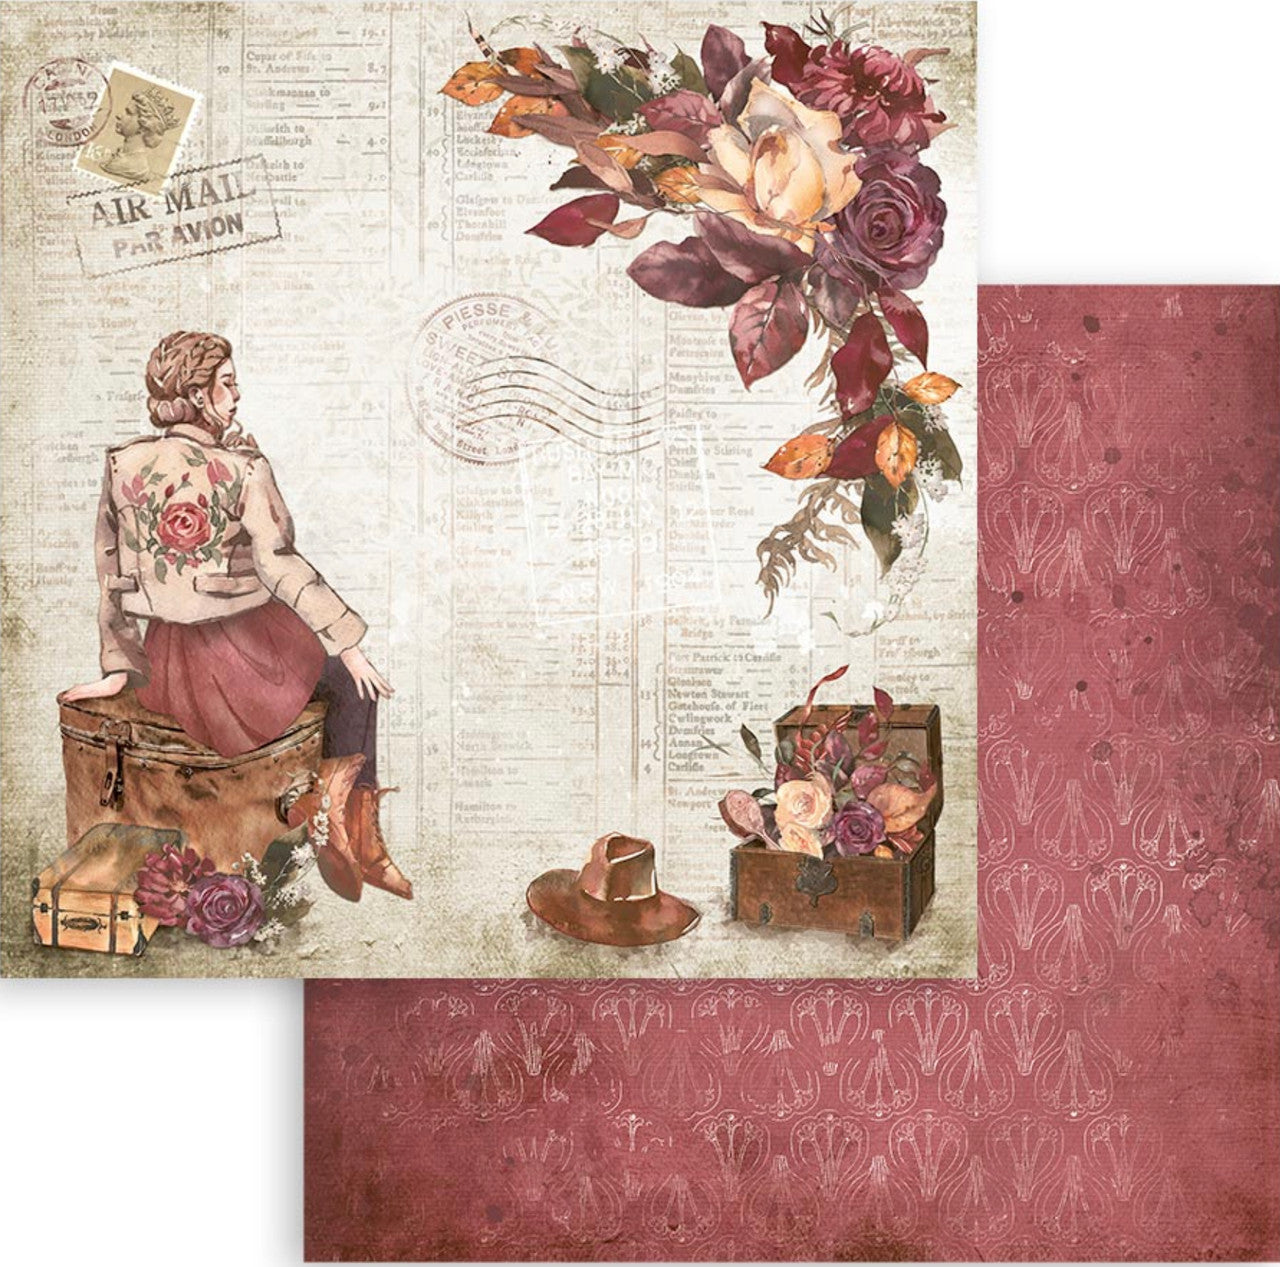 Stamperia Romantic Collection - Our Way 12” x 12” Paper Collection